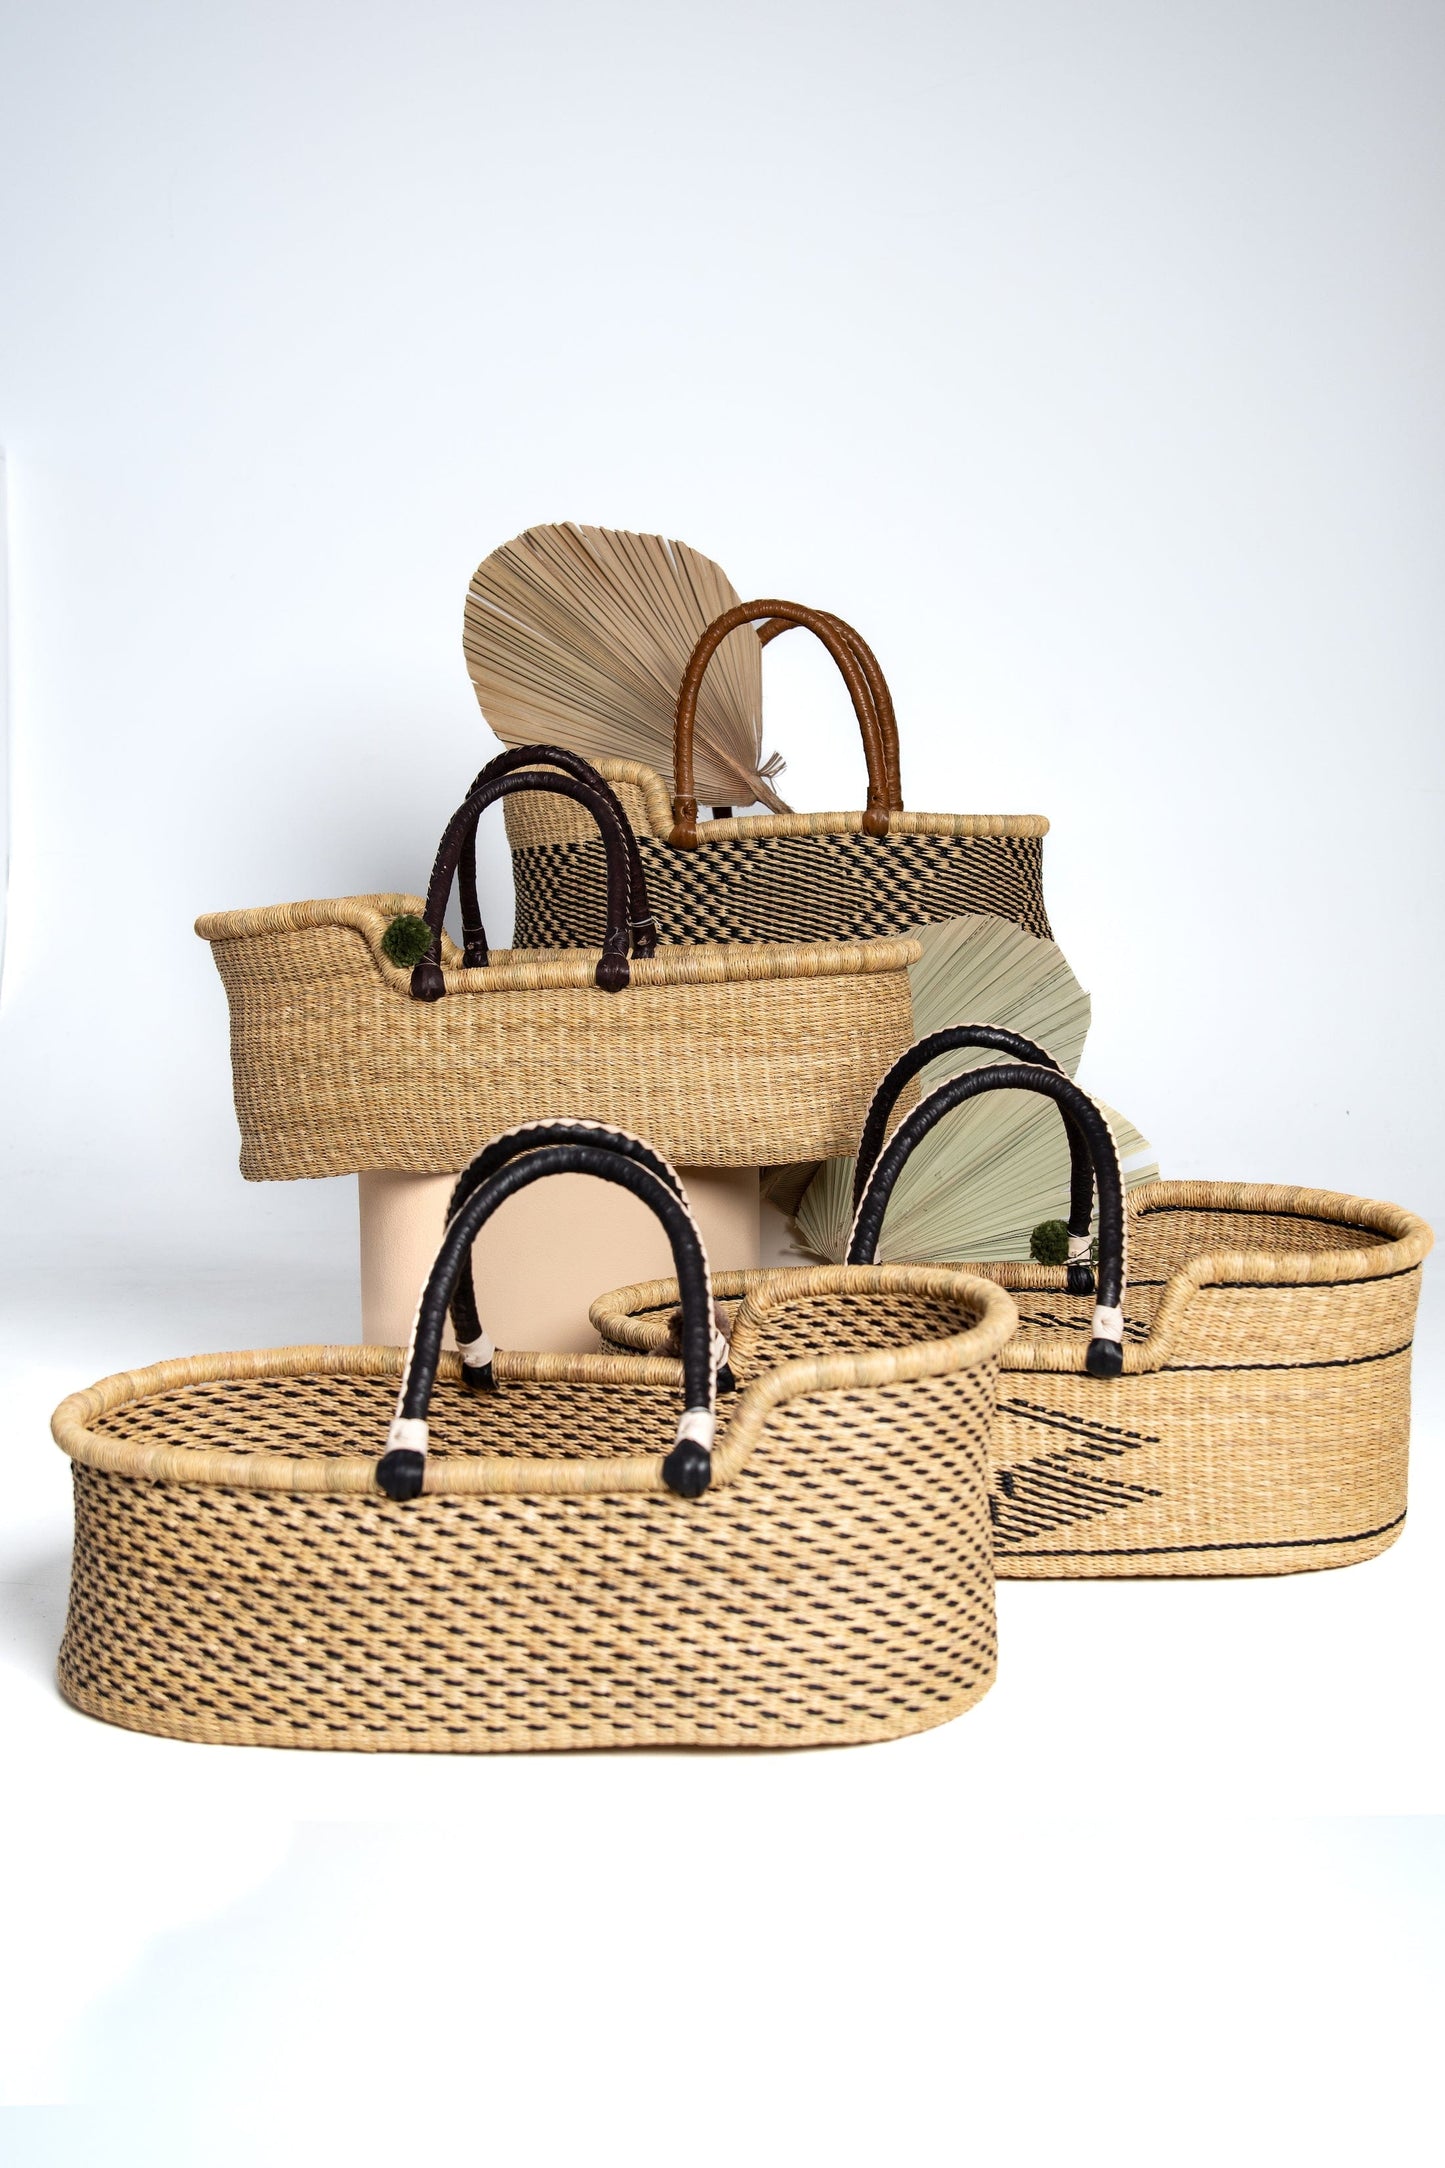 High African Basket Moses KidooCrafts with Mattress